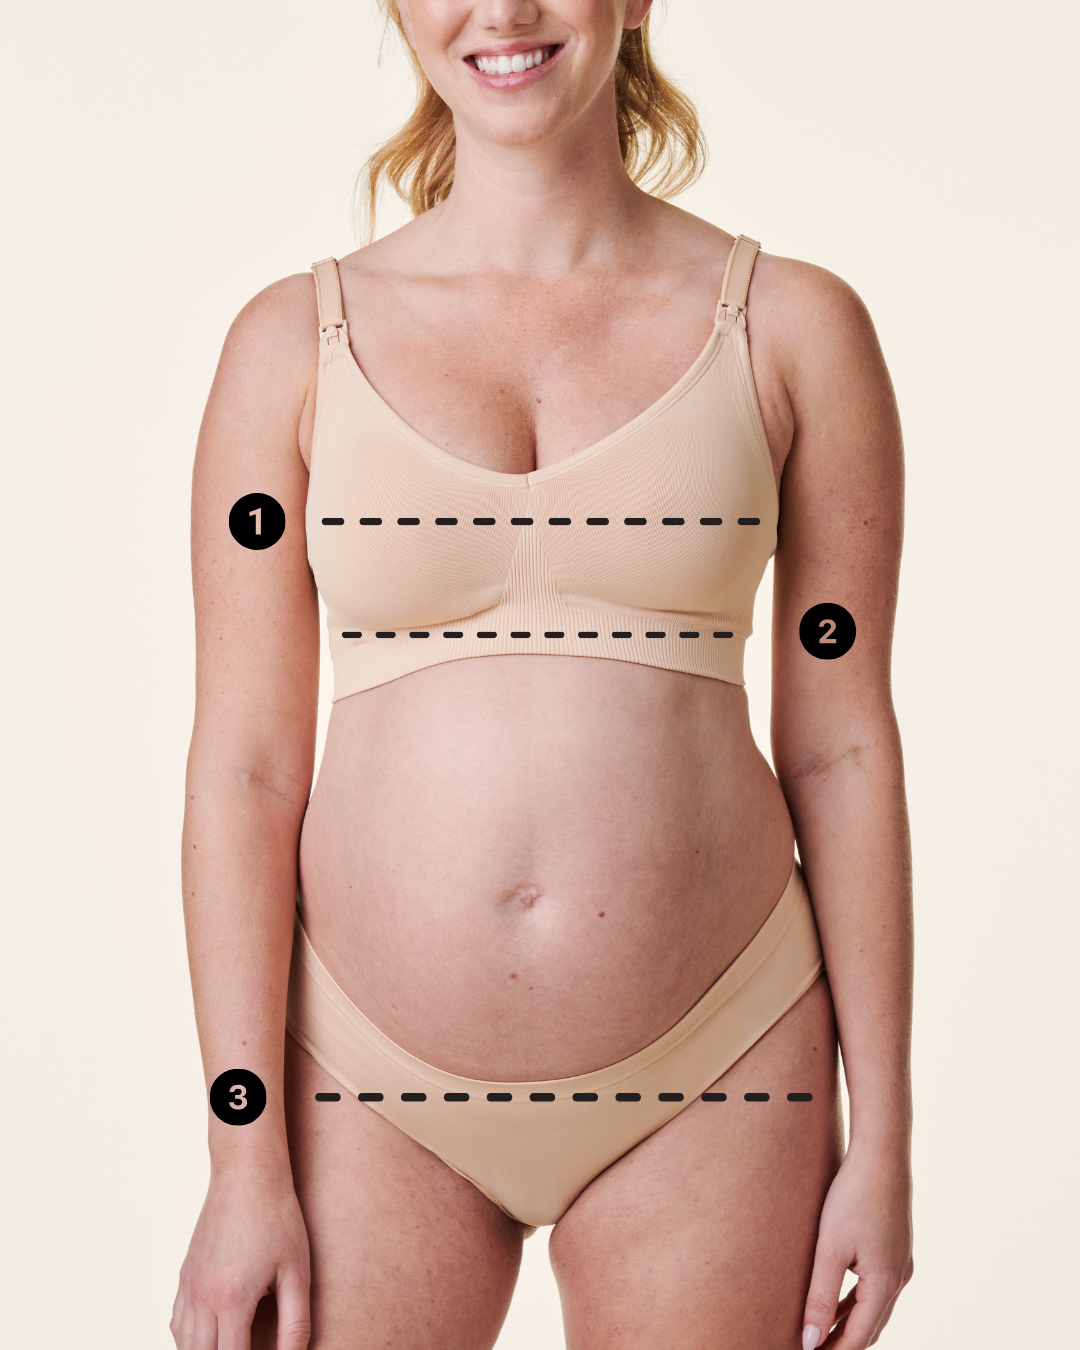 All Size Charts – Carry Maternity Canada